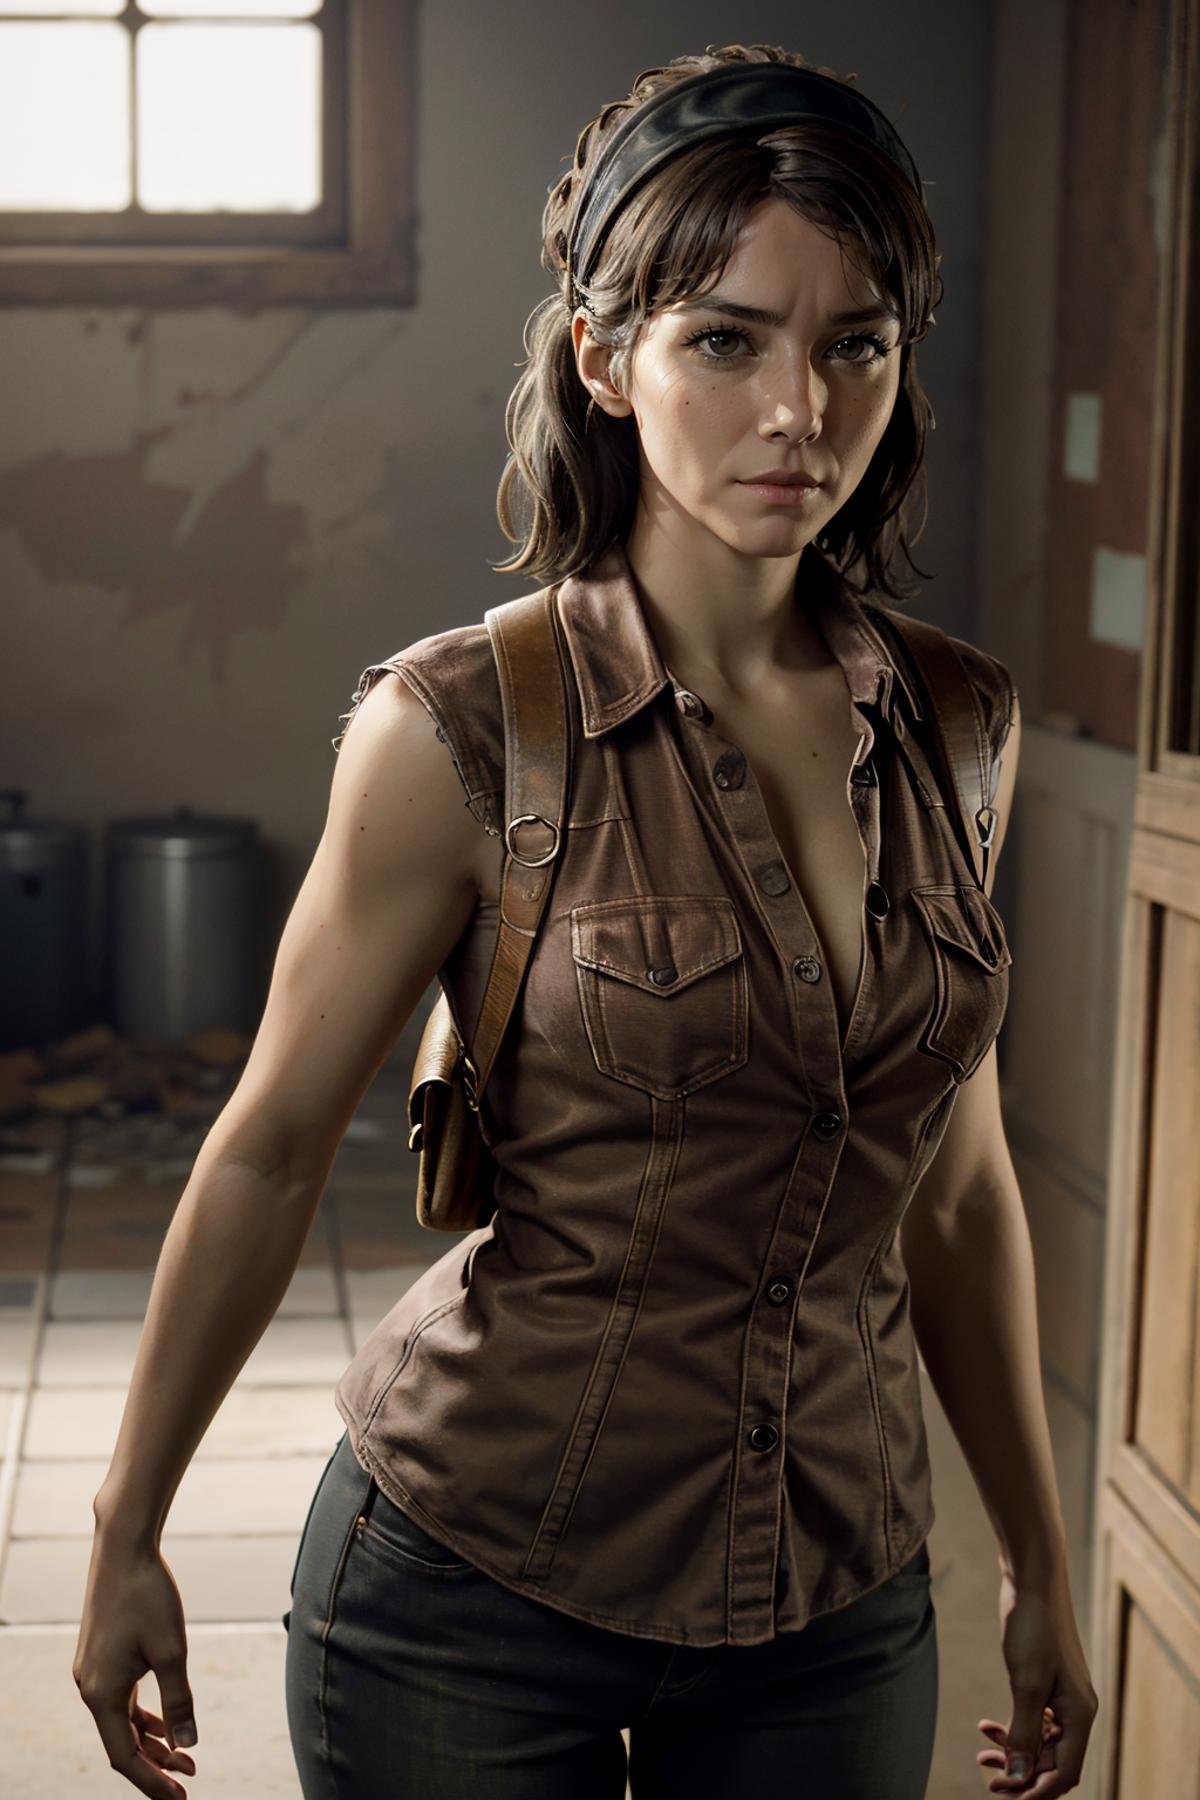 Tess from The Last of Us image by BloodRedKittie